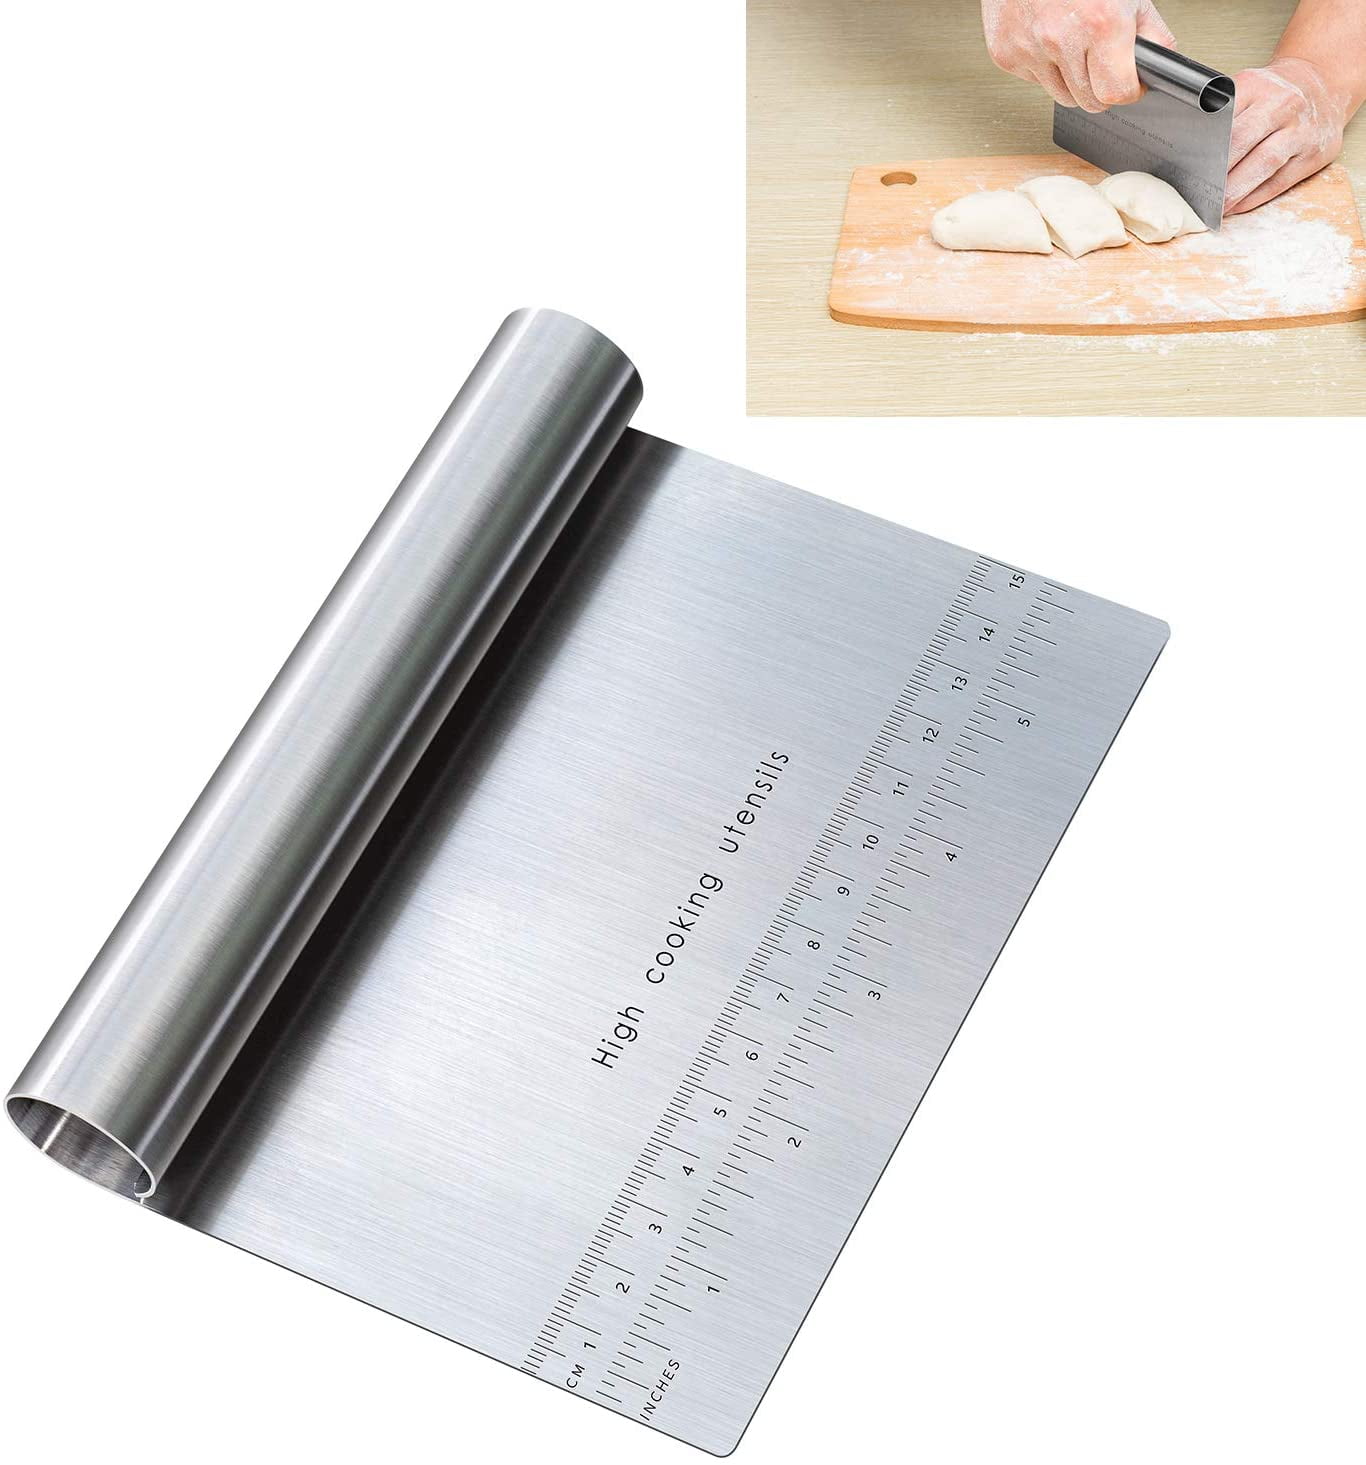 Dough Scraper Bench Knife: Professional Quality Heavy Duty Stainless Steel  Bench Scraper, Chopper, Cutter - Perfect for Pastry, Nuts, Herbs